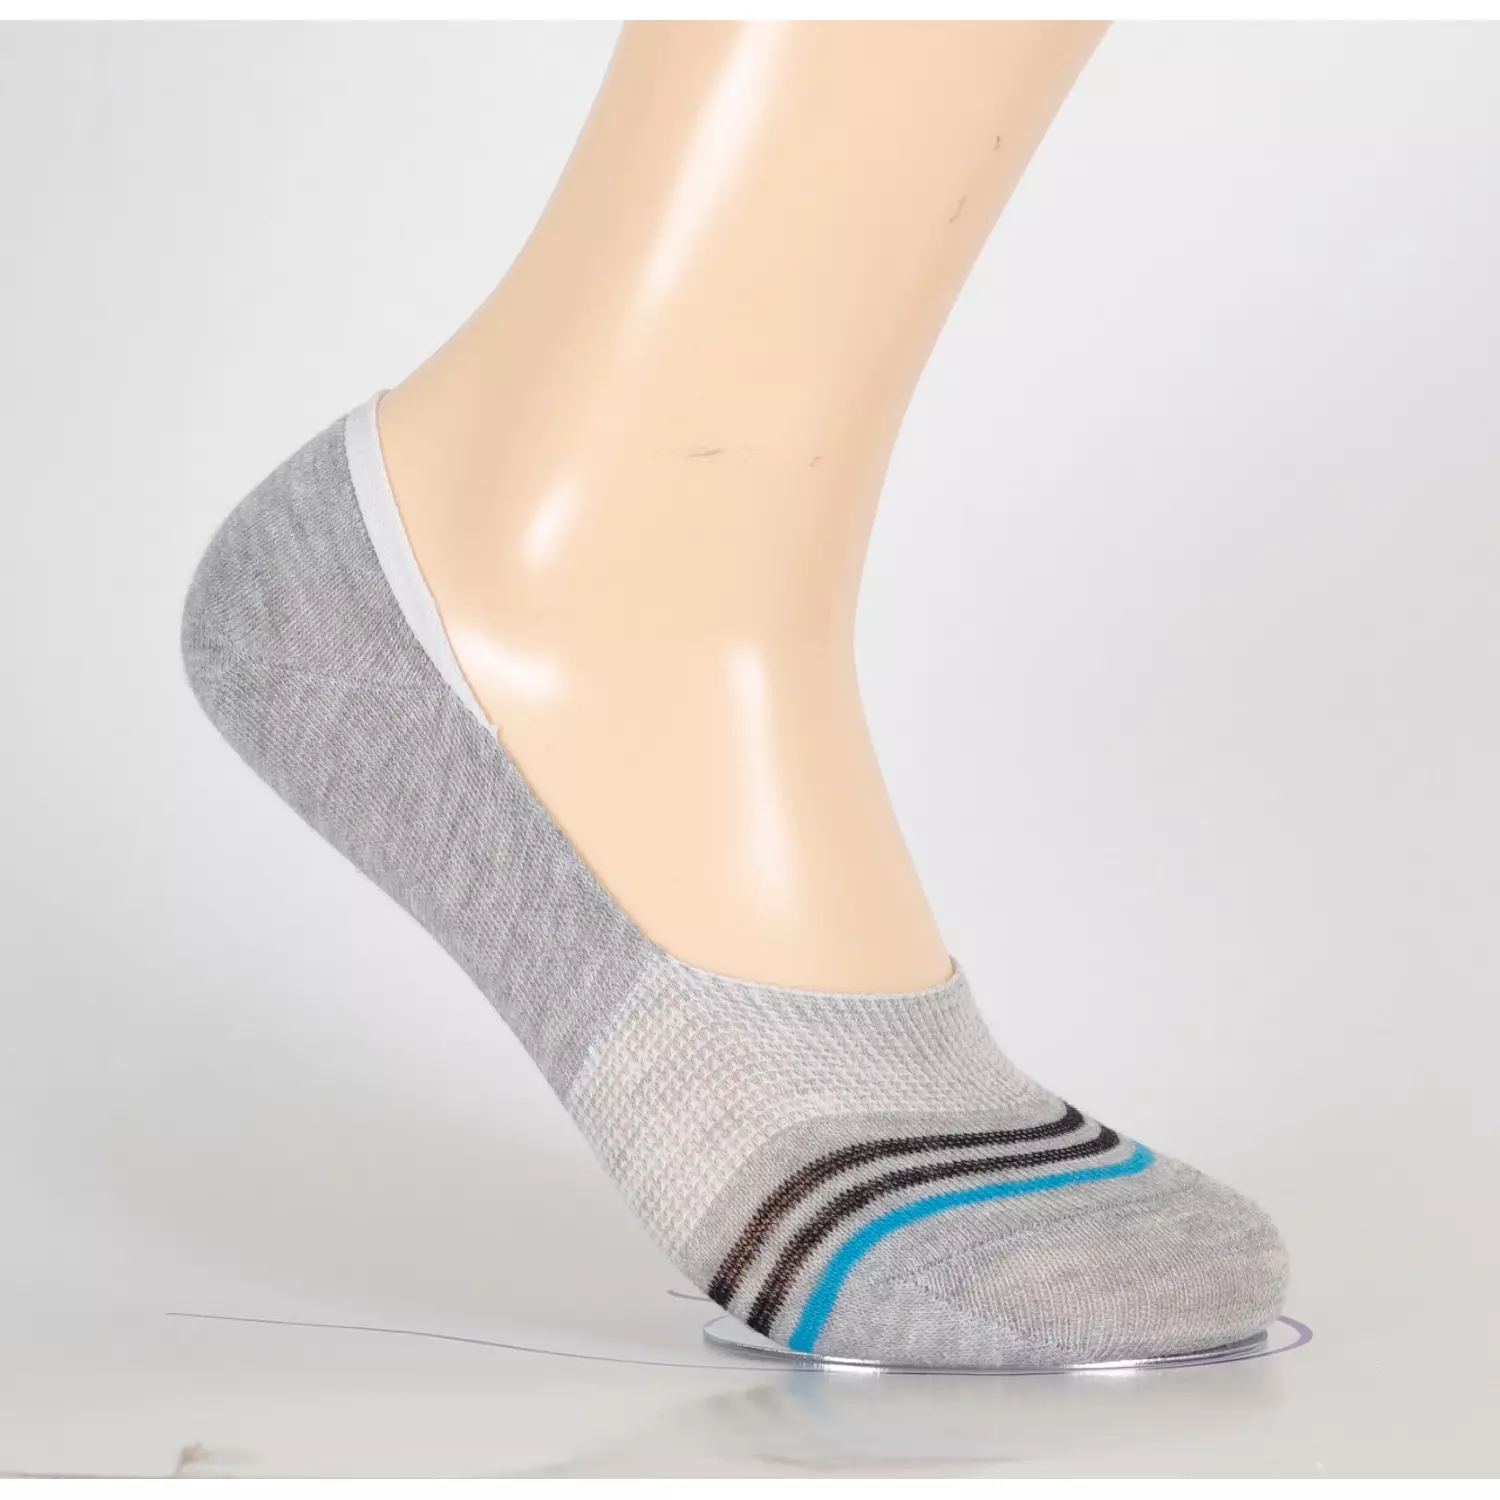 Vouche invisible Sock for women's 3